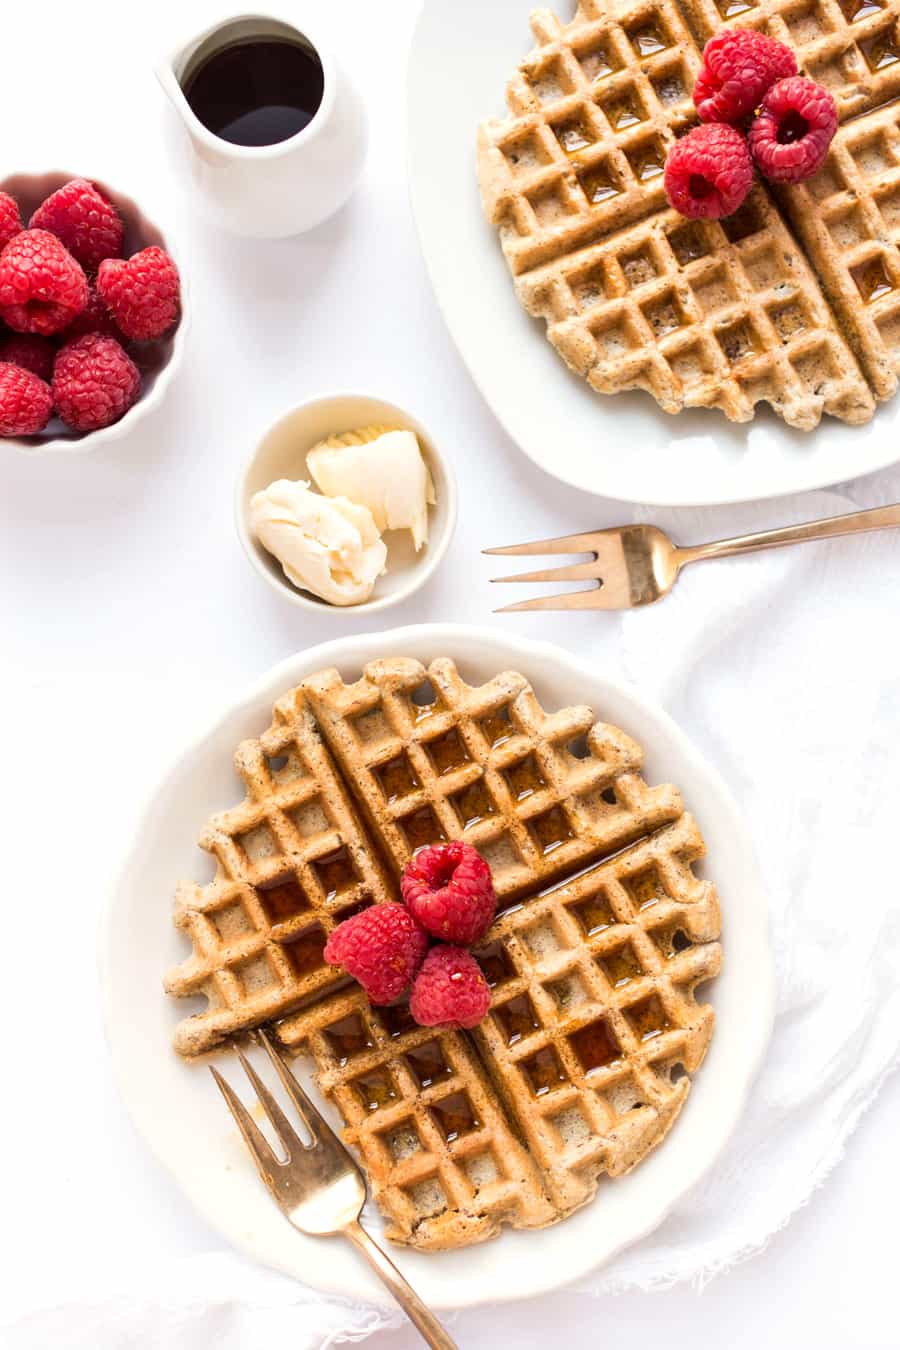 These ALMOND FLOUR WAFFLES are what breakfast dreams are made of! With a blend of wholesome, high-protein flours they're hearty and fluffy at the same time!